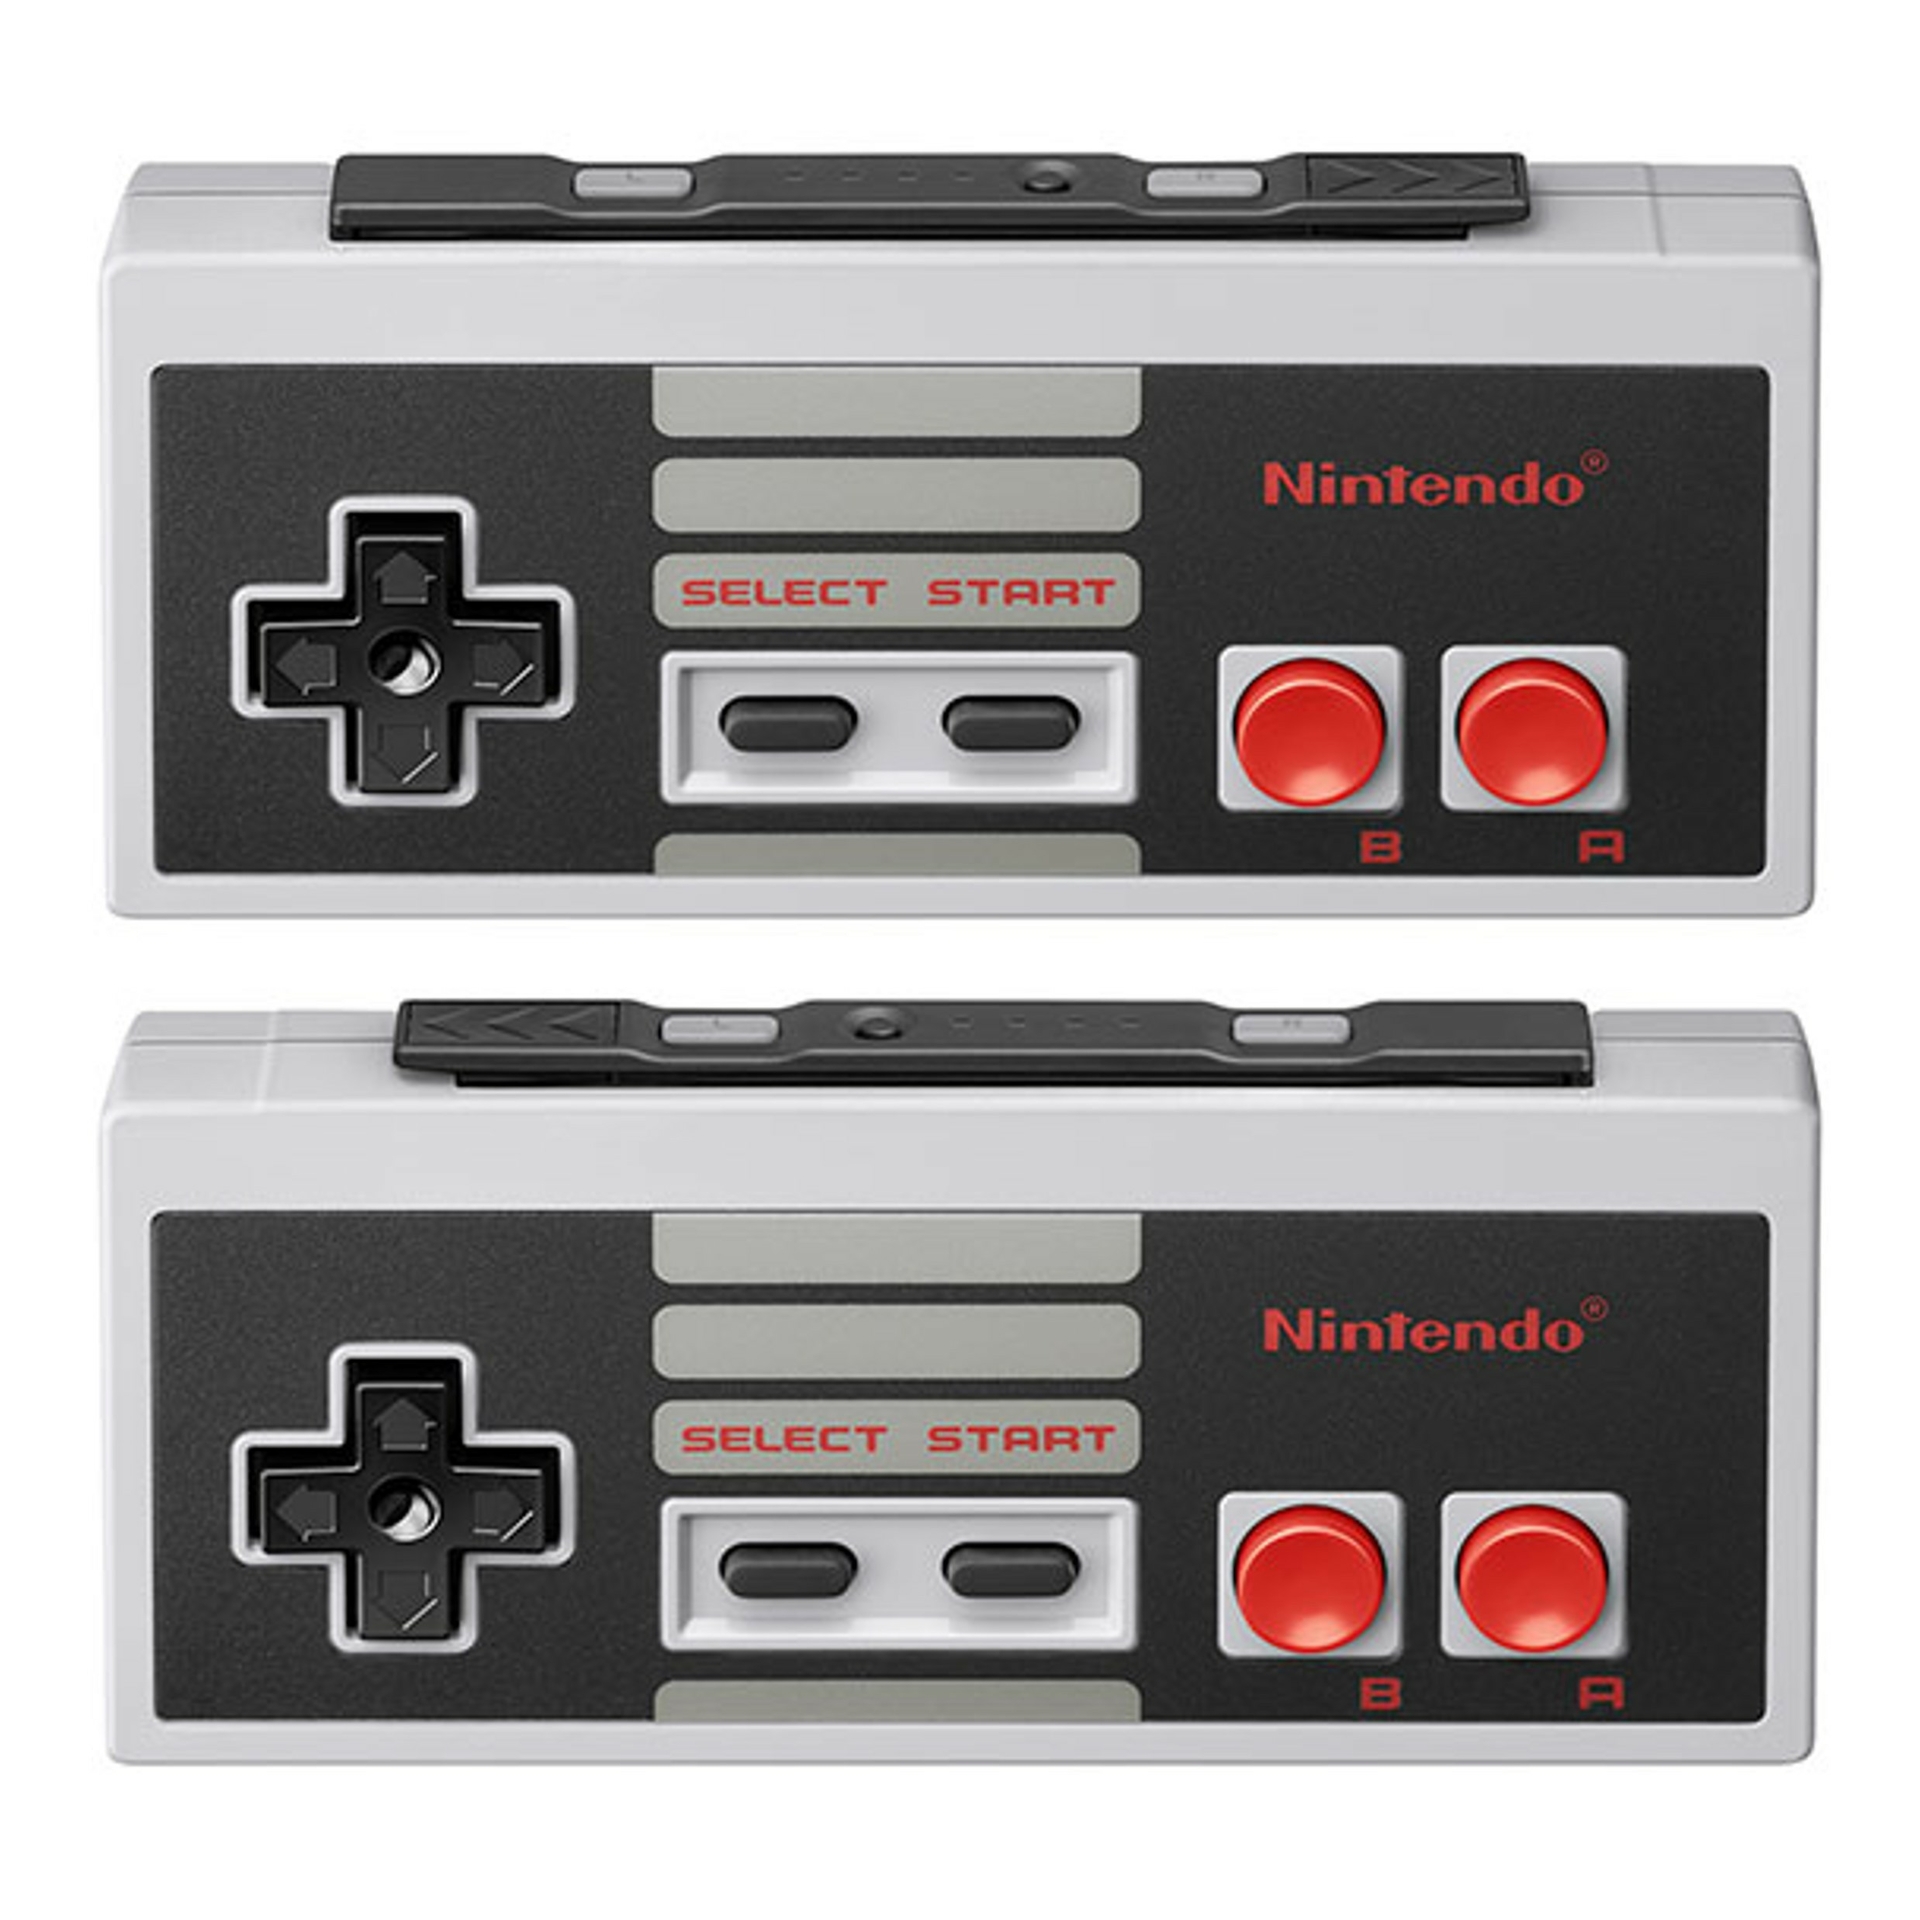 Nintendo Entertainment System Controllers voor de Nintendo Switch - Nintendo Switch Hardware